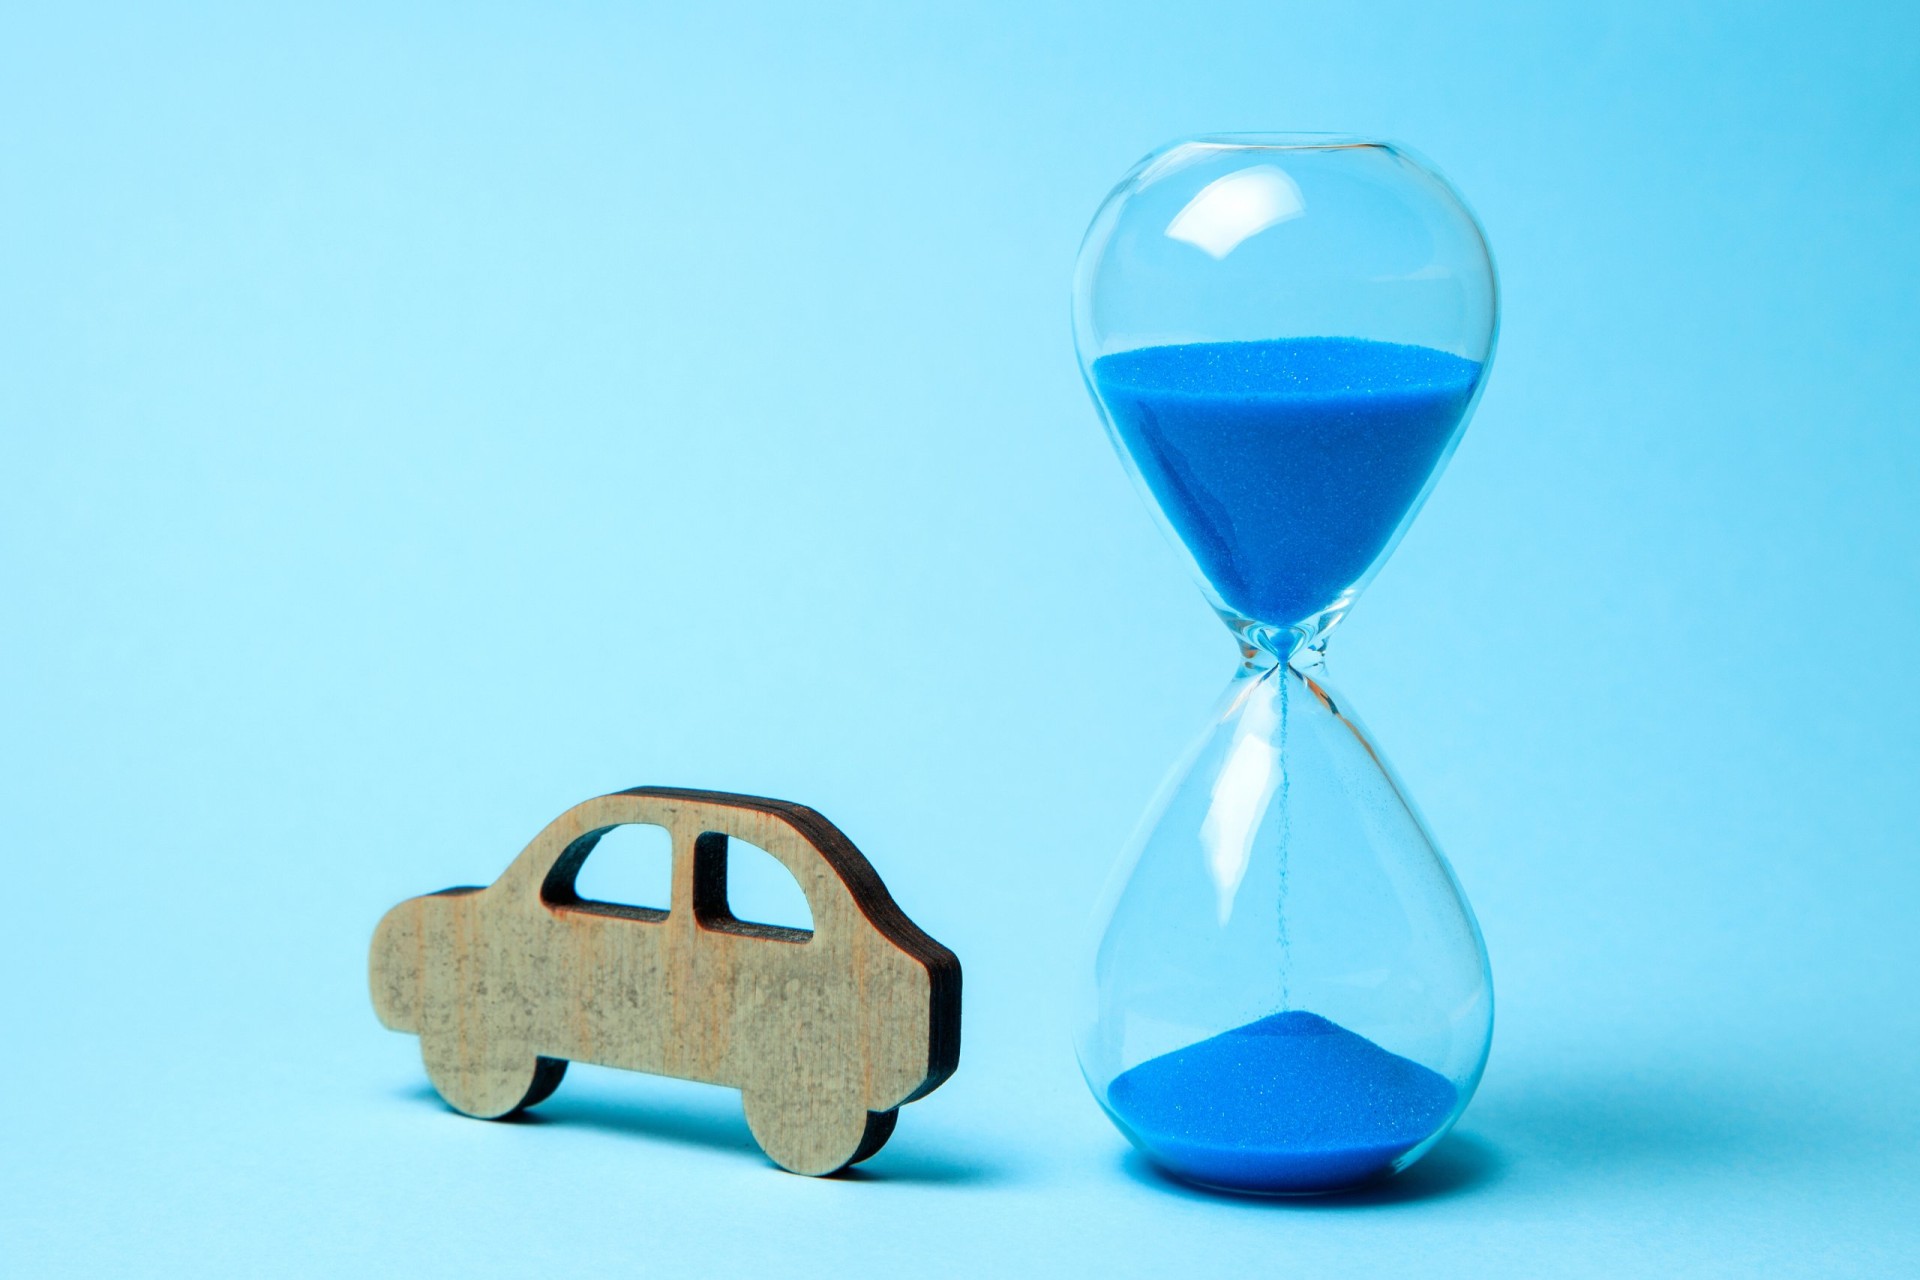 Depreciation or depreciation of the car over time. Wooden car and hourglass on blue background. 